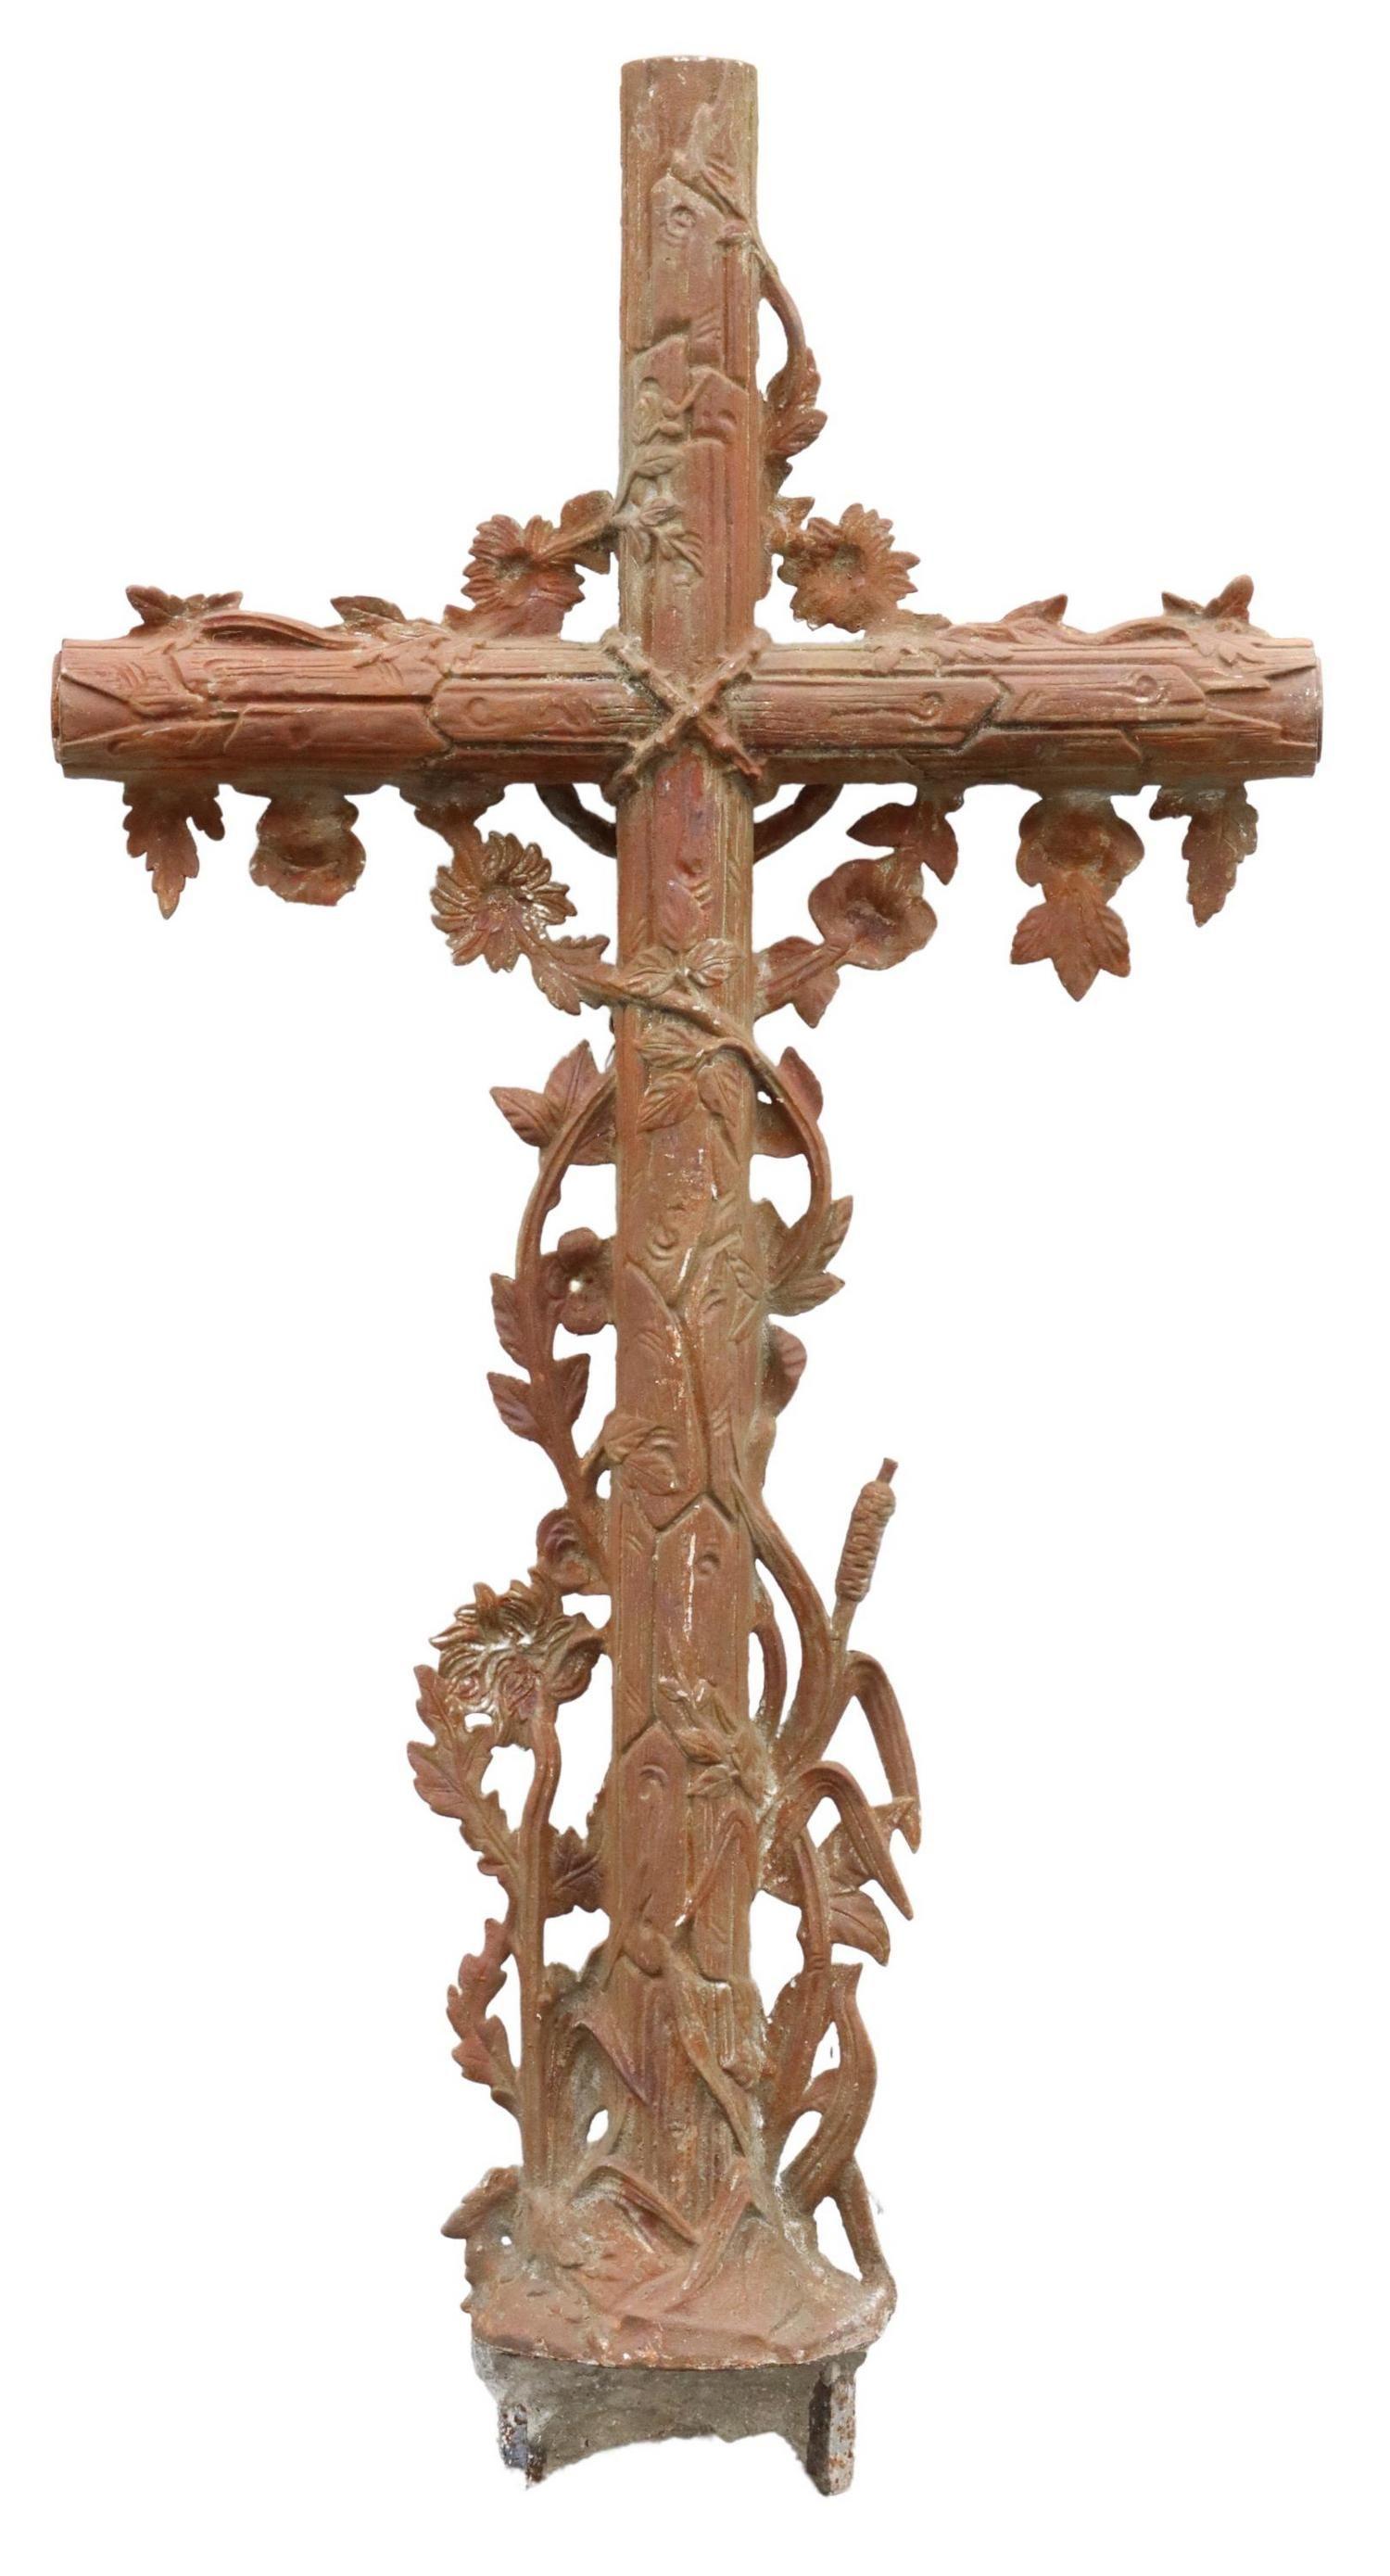 French cast iron cross, 19th century. This faux bois iron cross features trailing foliates, centering Corpus Christi, over reeds.

Dimensions
approx 51